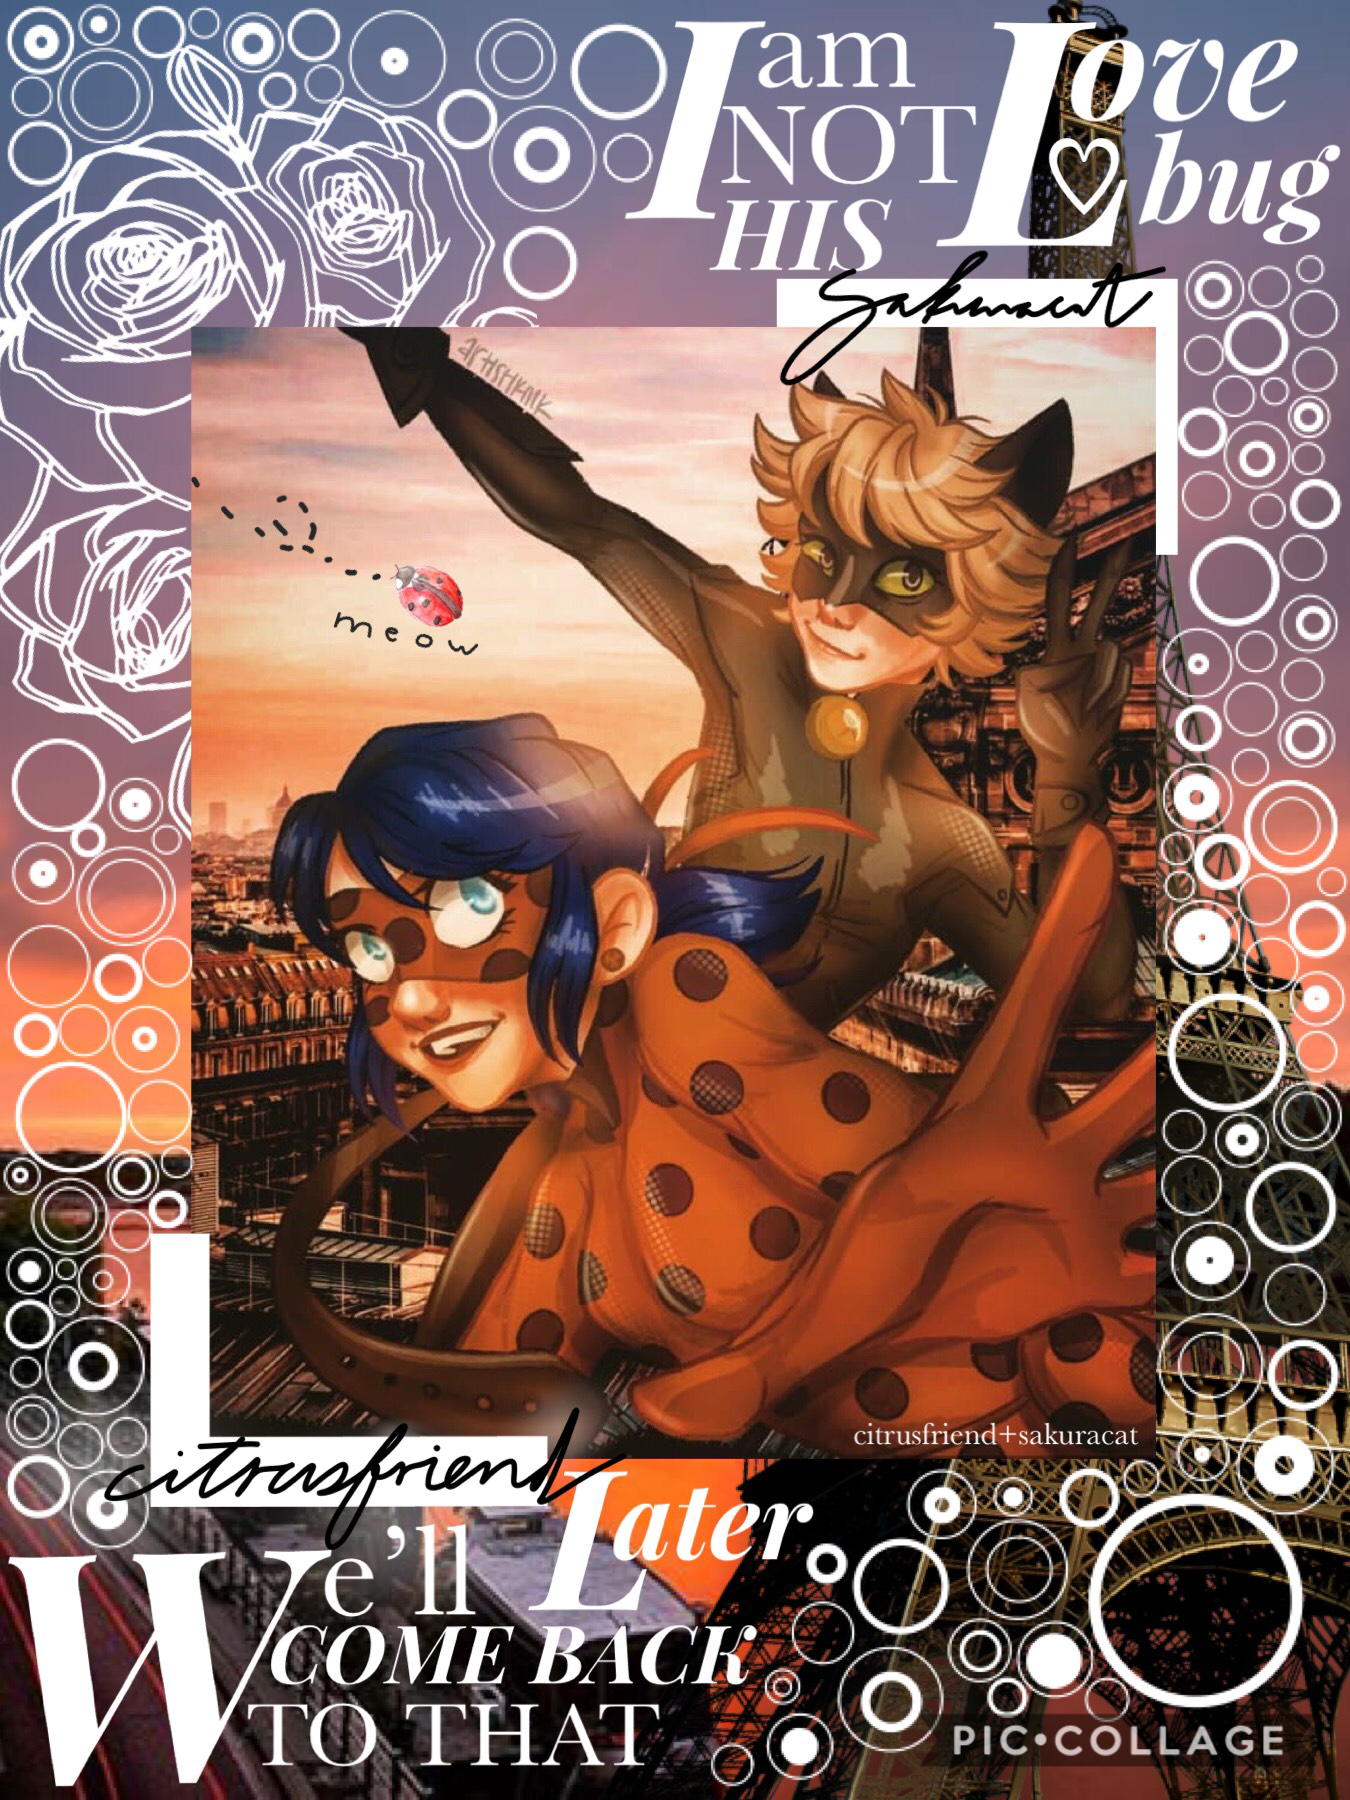 Collab with @citrusfriend (previously abstractthoughts) THANK YOU FOR LETTING ME USE THE FANART FOR THIS YOUR ART IS AMAZING
Check remixes for a random Chat Noir thing
QOTD: a song that calms you down (and has nothing to do with love?) 
AOTD: Lost Boy-Rut